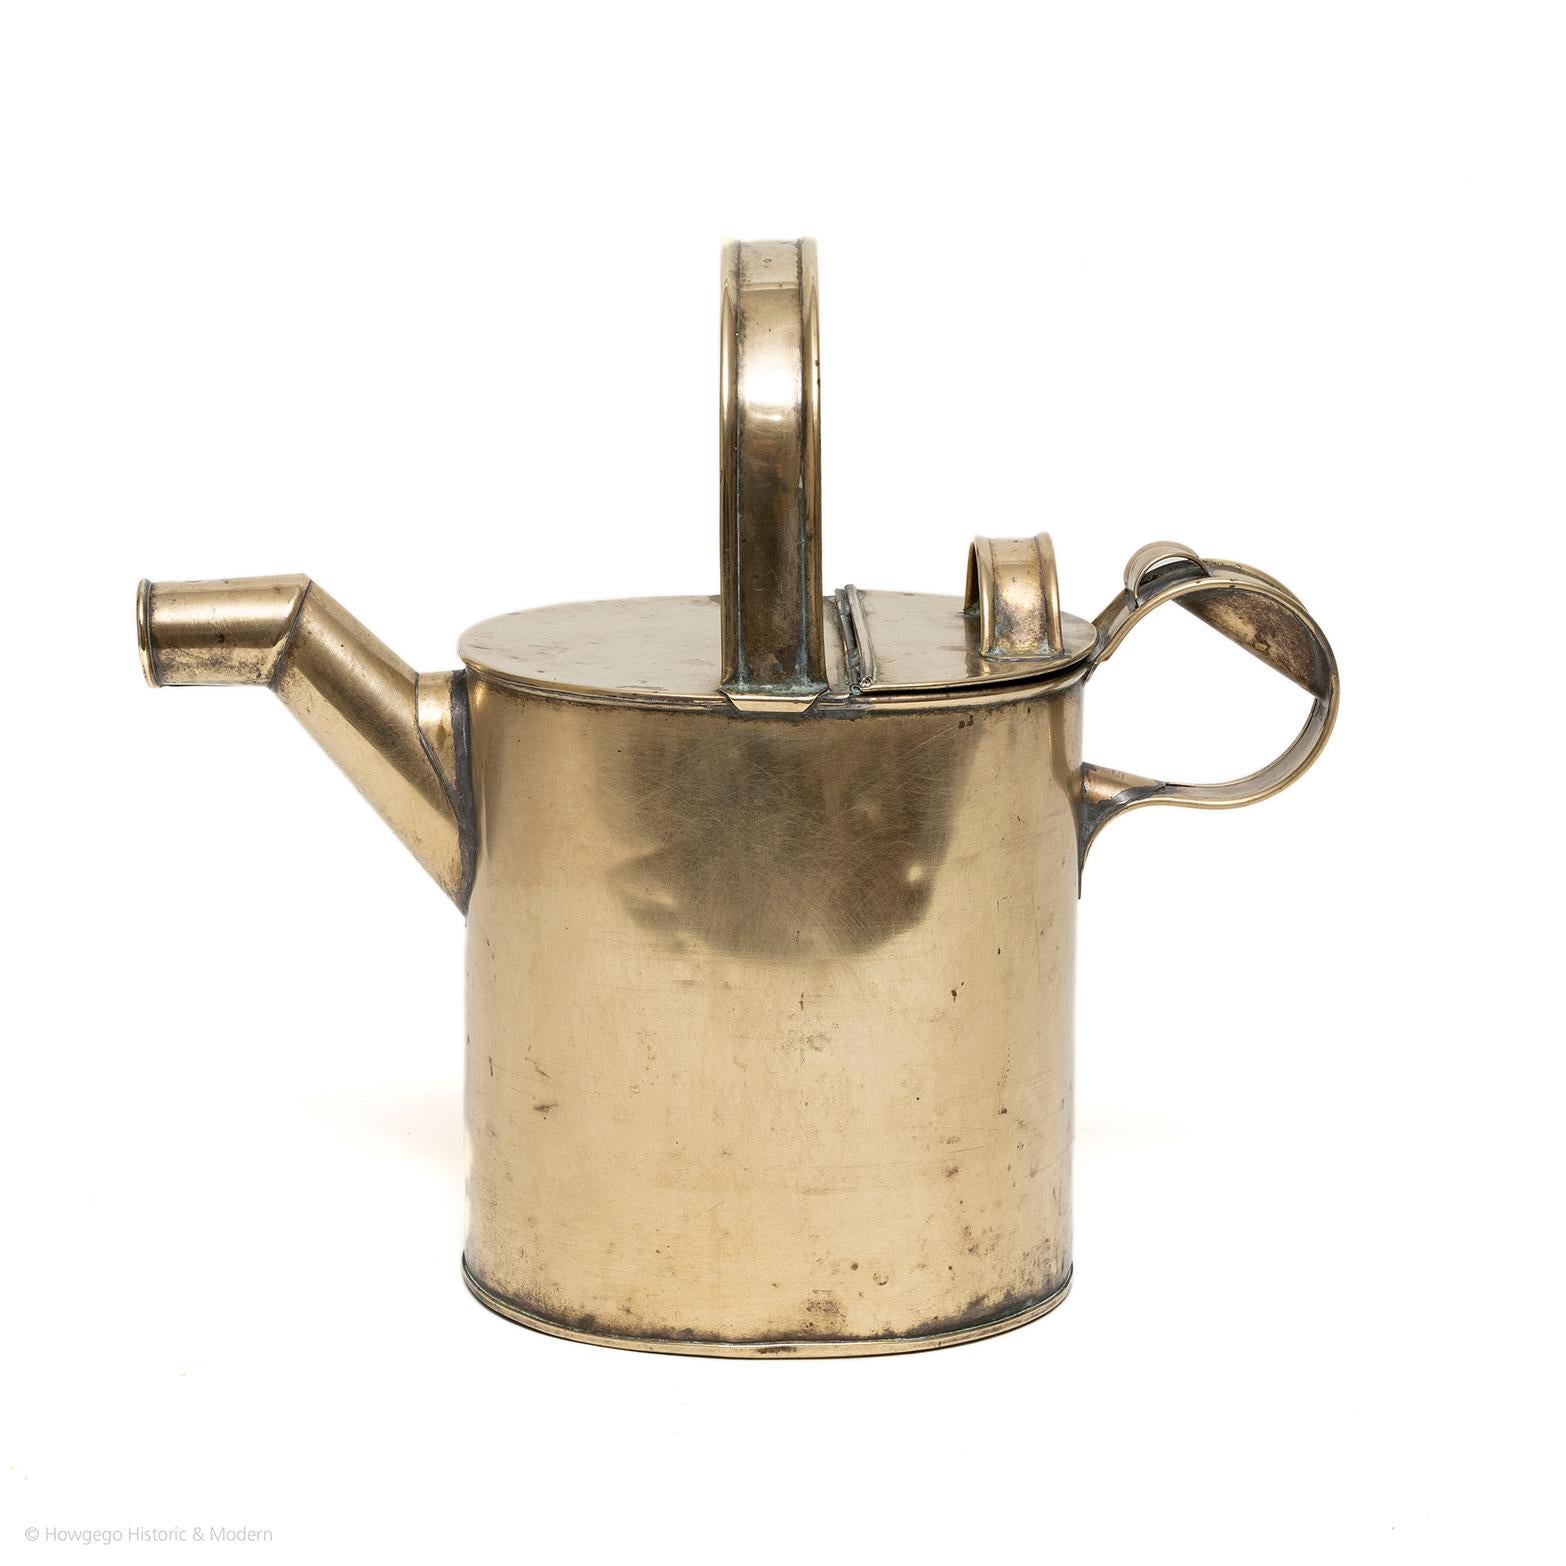 Perfect size for house plants, seeds or carrying hot water.
Beautiful collectors item or decorative object.

A fine Victorian oval, brass watering can or hot water jug. Upper brass handle across top, back section of the top hinged to pour in